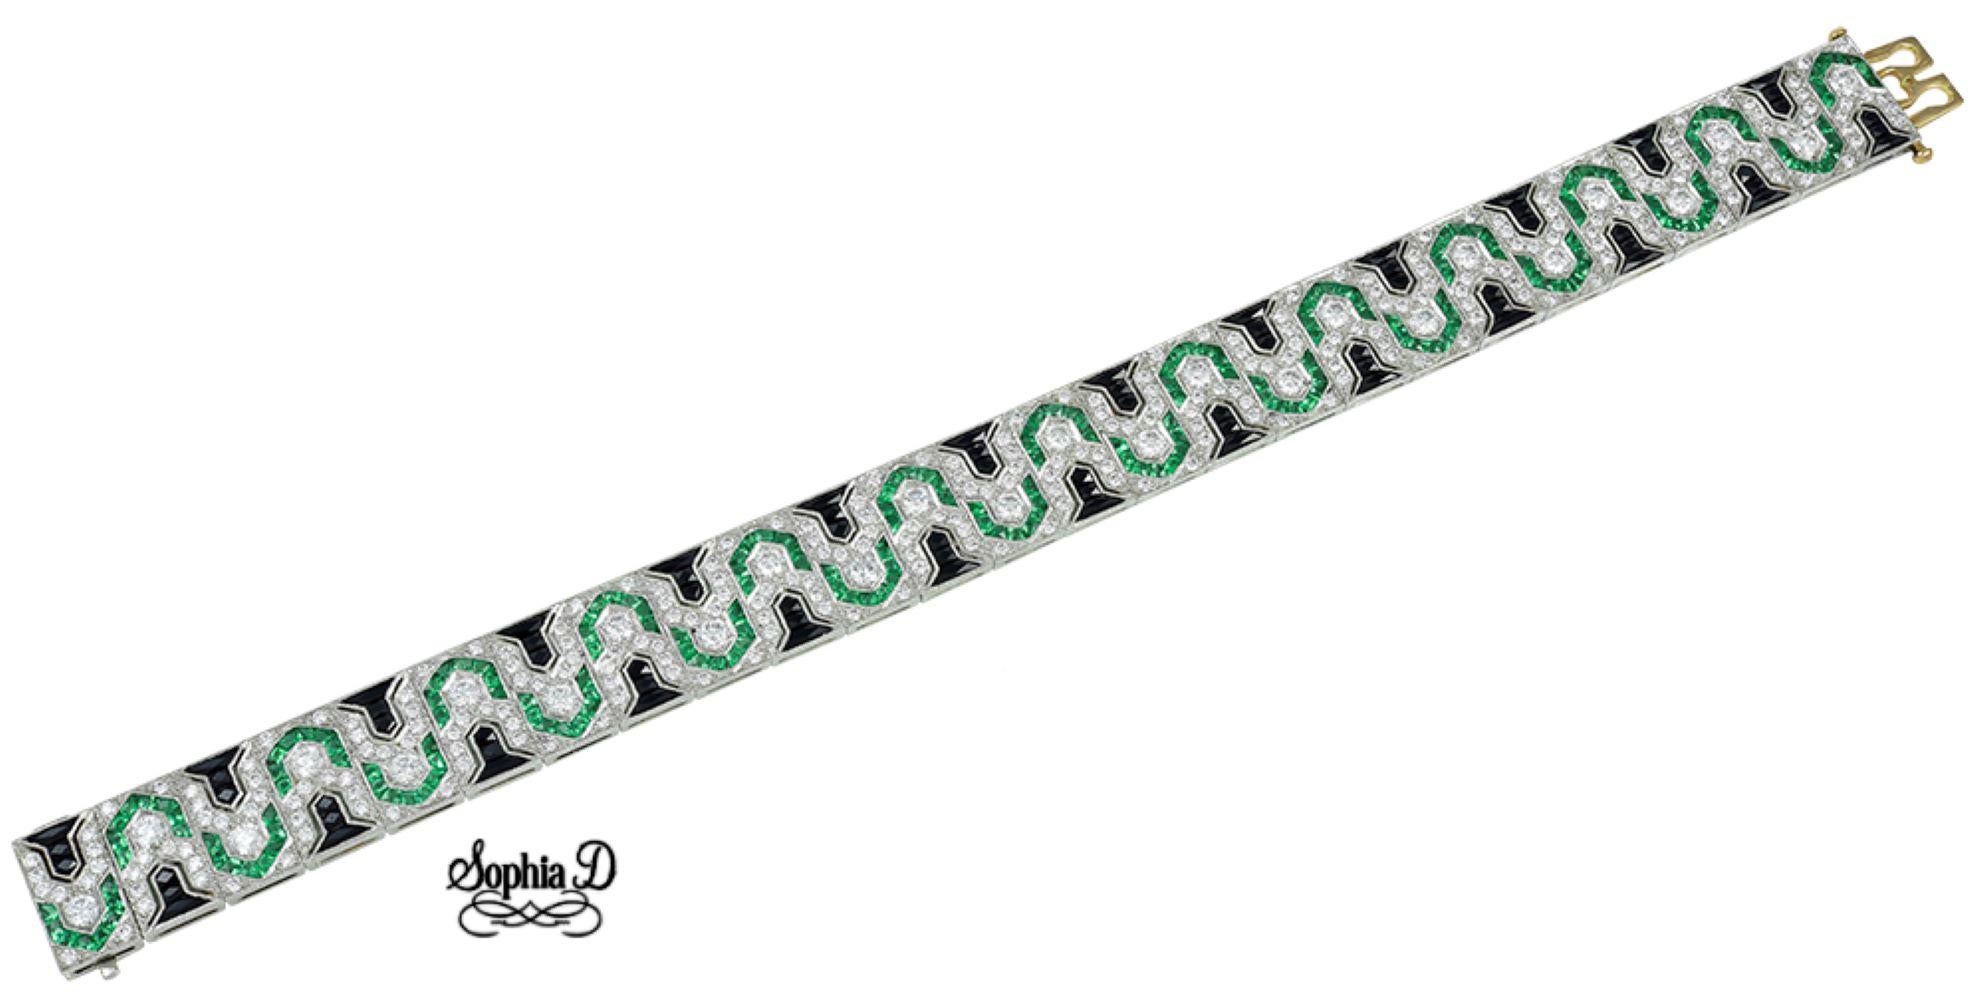 Sophia D Art Deco inspired platinum bracelet that features 4.59 carats of diamond and 6.69 carats of green emerald with onyx.

Sophia D by Joseph Dardashti LTD has been known worldwide for 35 years and are inspired by classic Art Deco design that